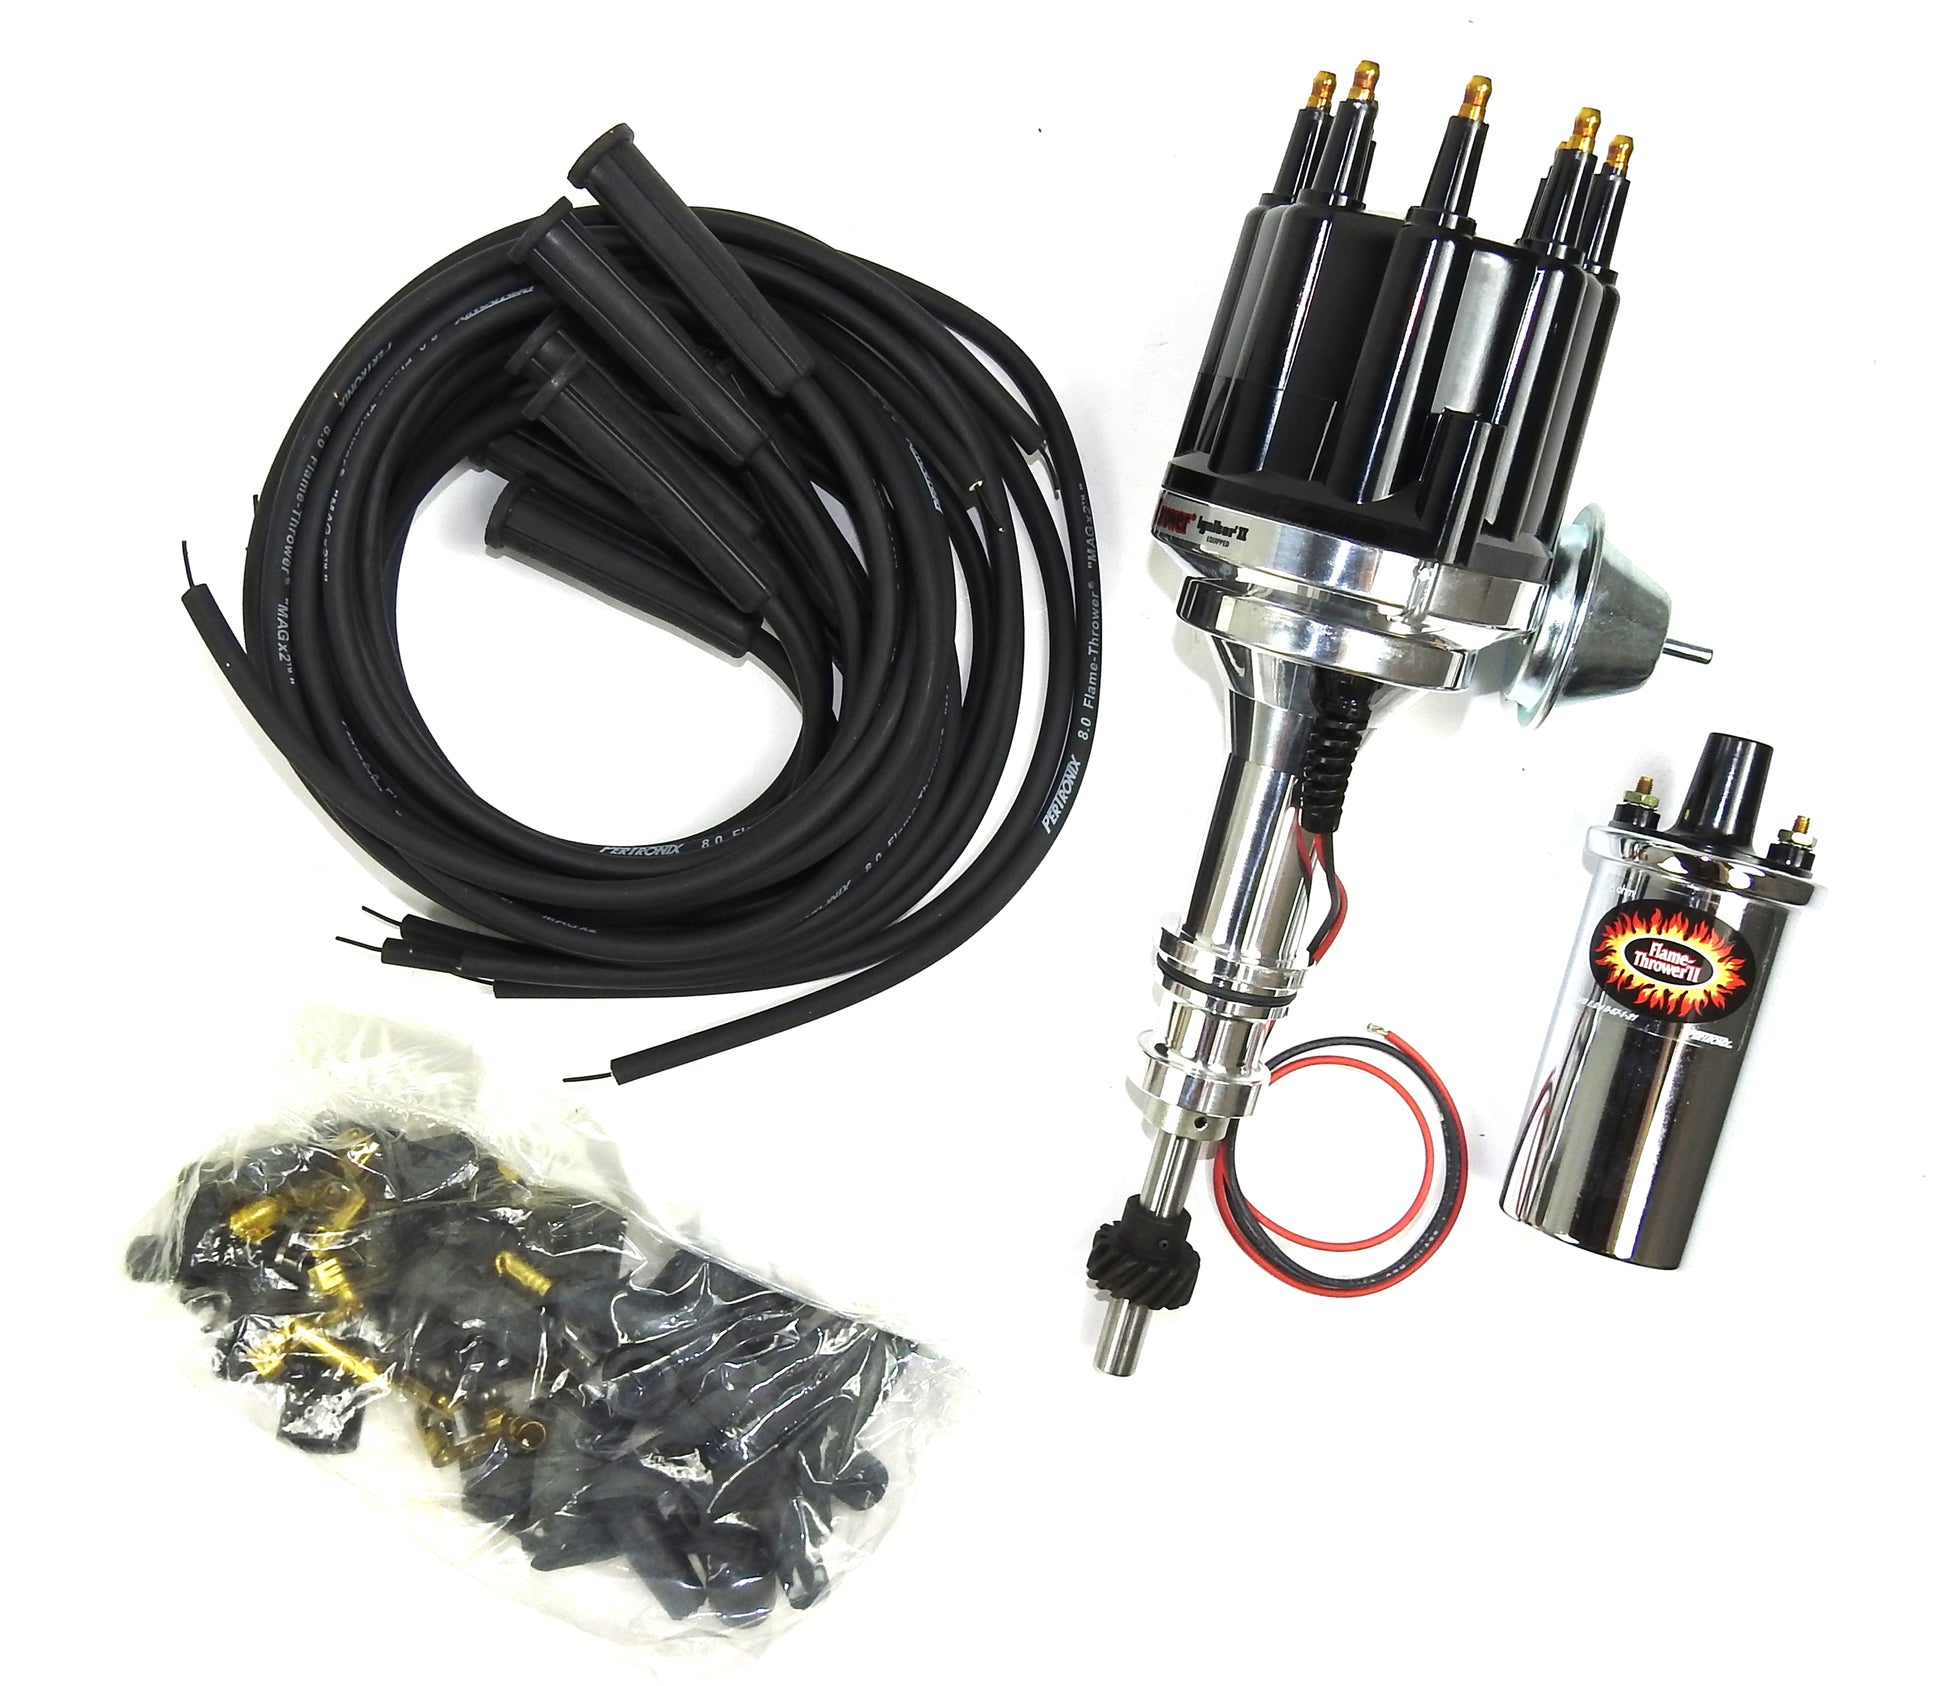 Pertronix Bundle012 Ignition Kit includes Ford 351W Billet Plug n Play Distributor with Black Male Cap, Flame-Thrower II Chrome Coil, Flame-Thrower MAGx2 Universal Black Spark Plug Wires with 180 degree plug boot ends